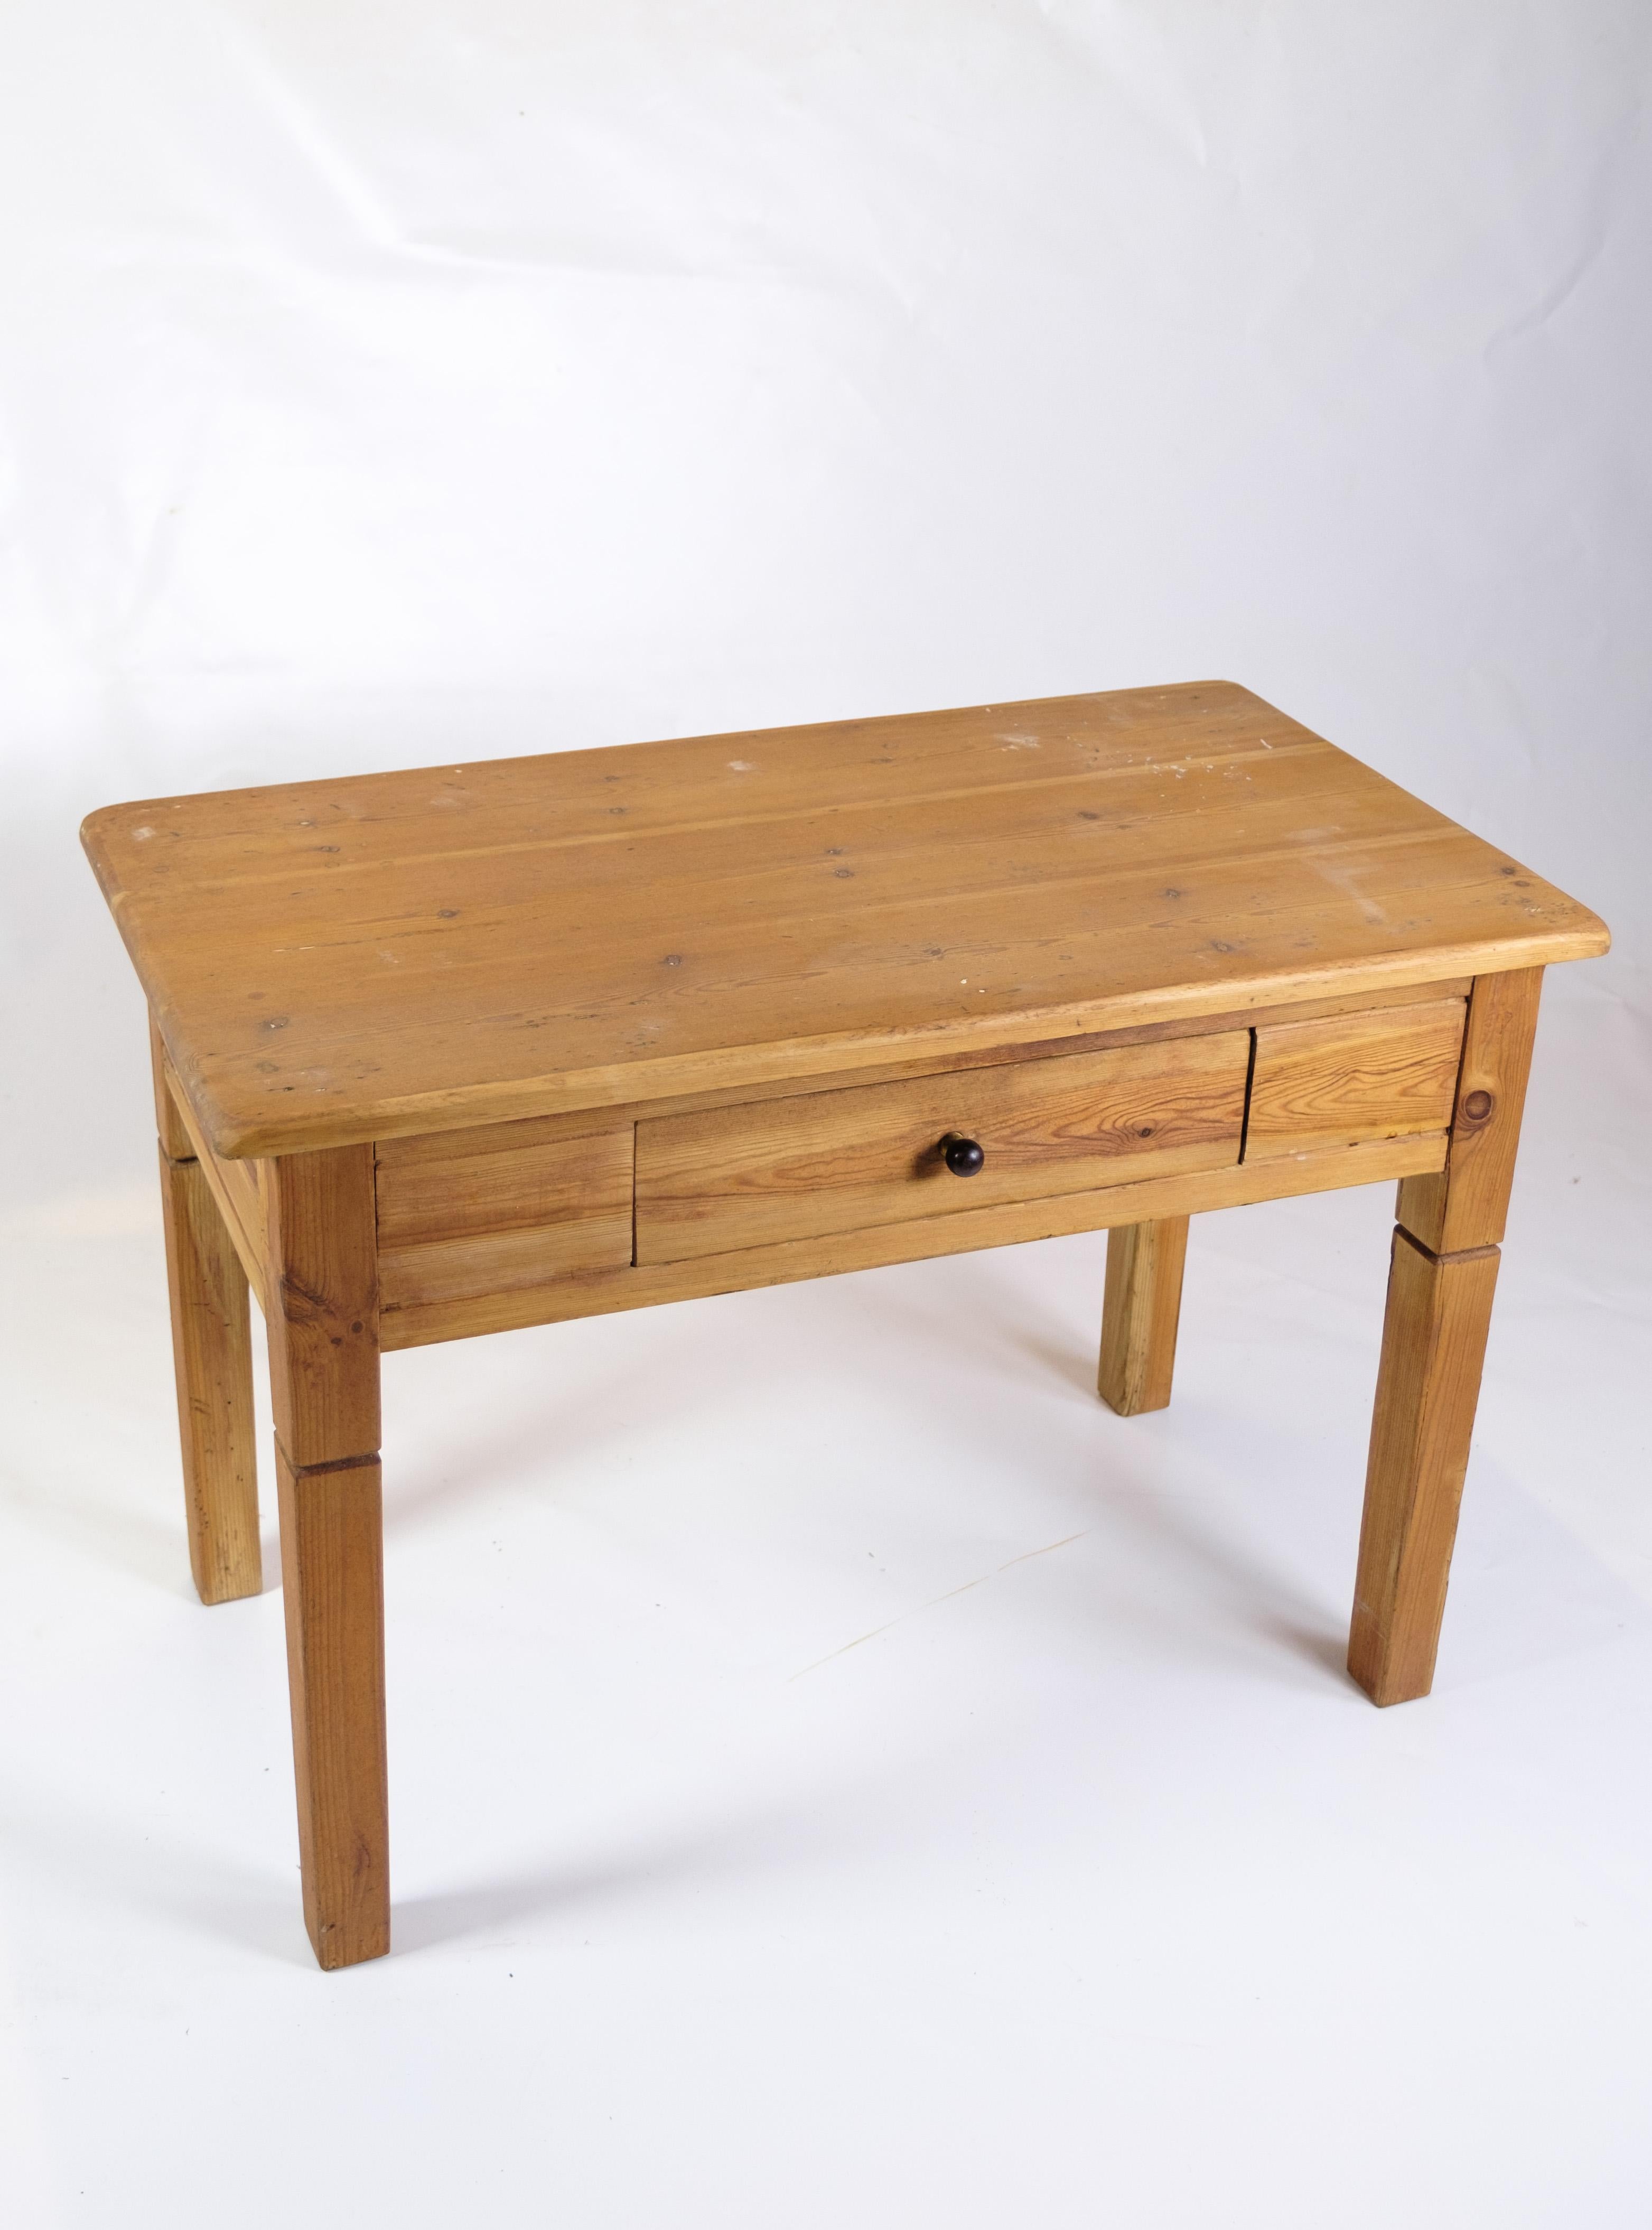 This circa 1920s pine side table with one drawer is a charming example of early 20th century furniture design. Its simple yet sturdy construction and vintage look add character and nostalgic appeal to any room.

The side table, probably handmade by